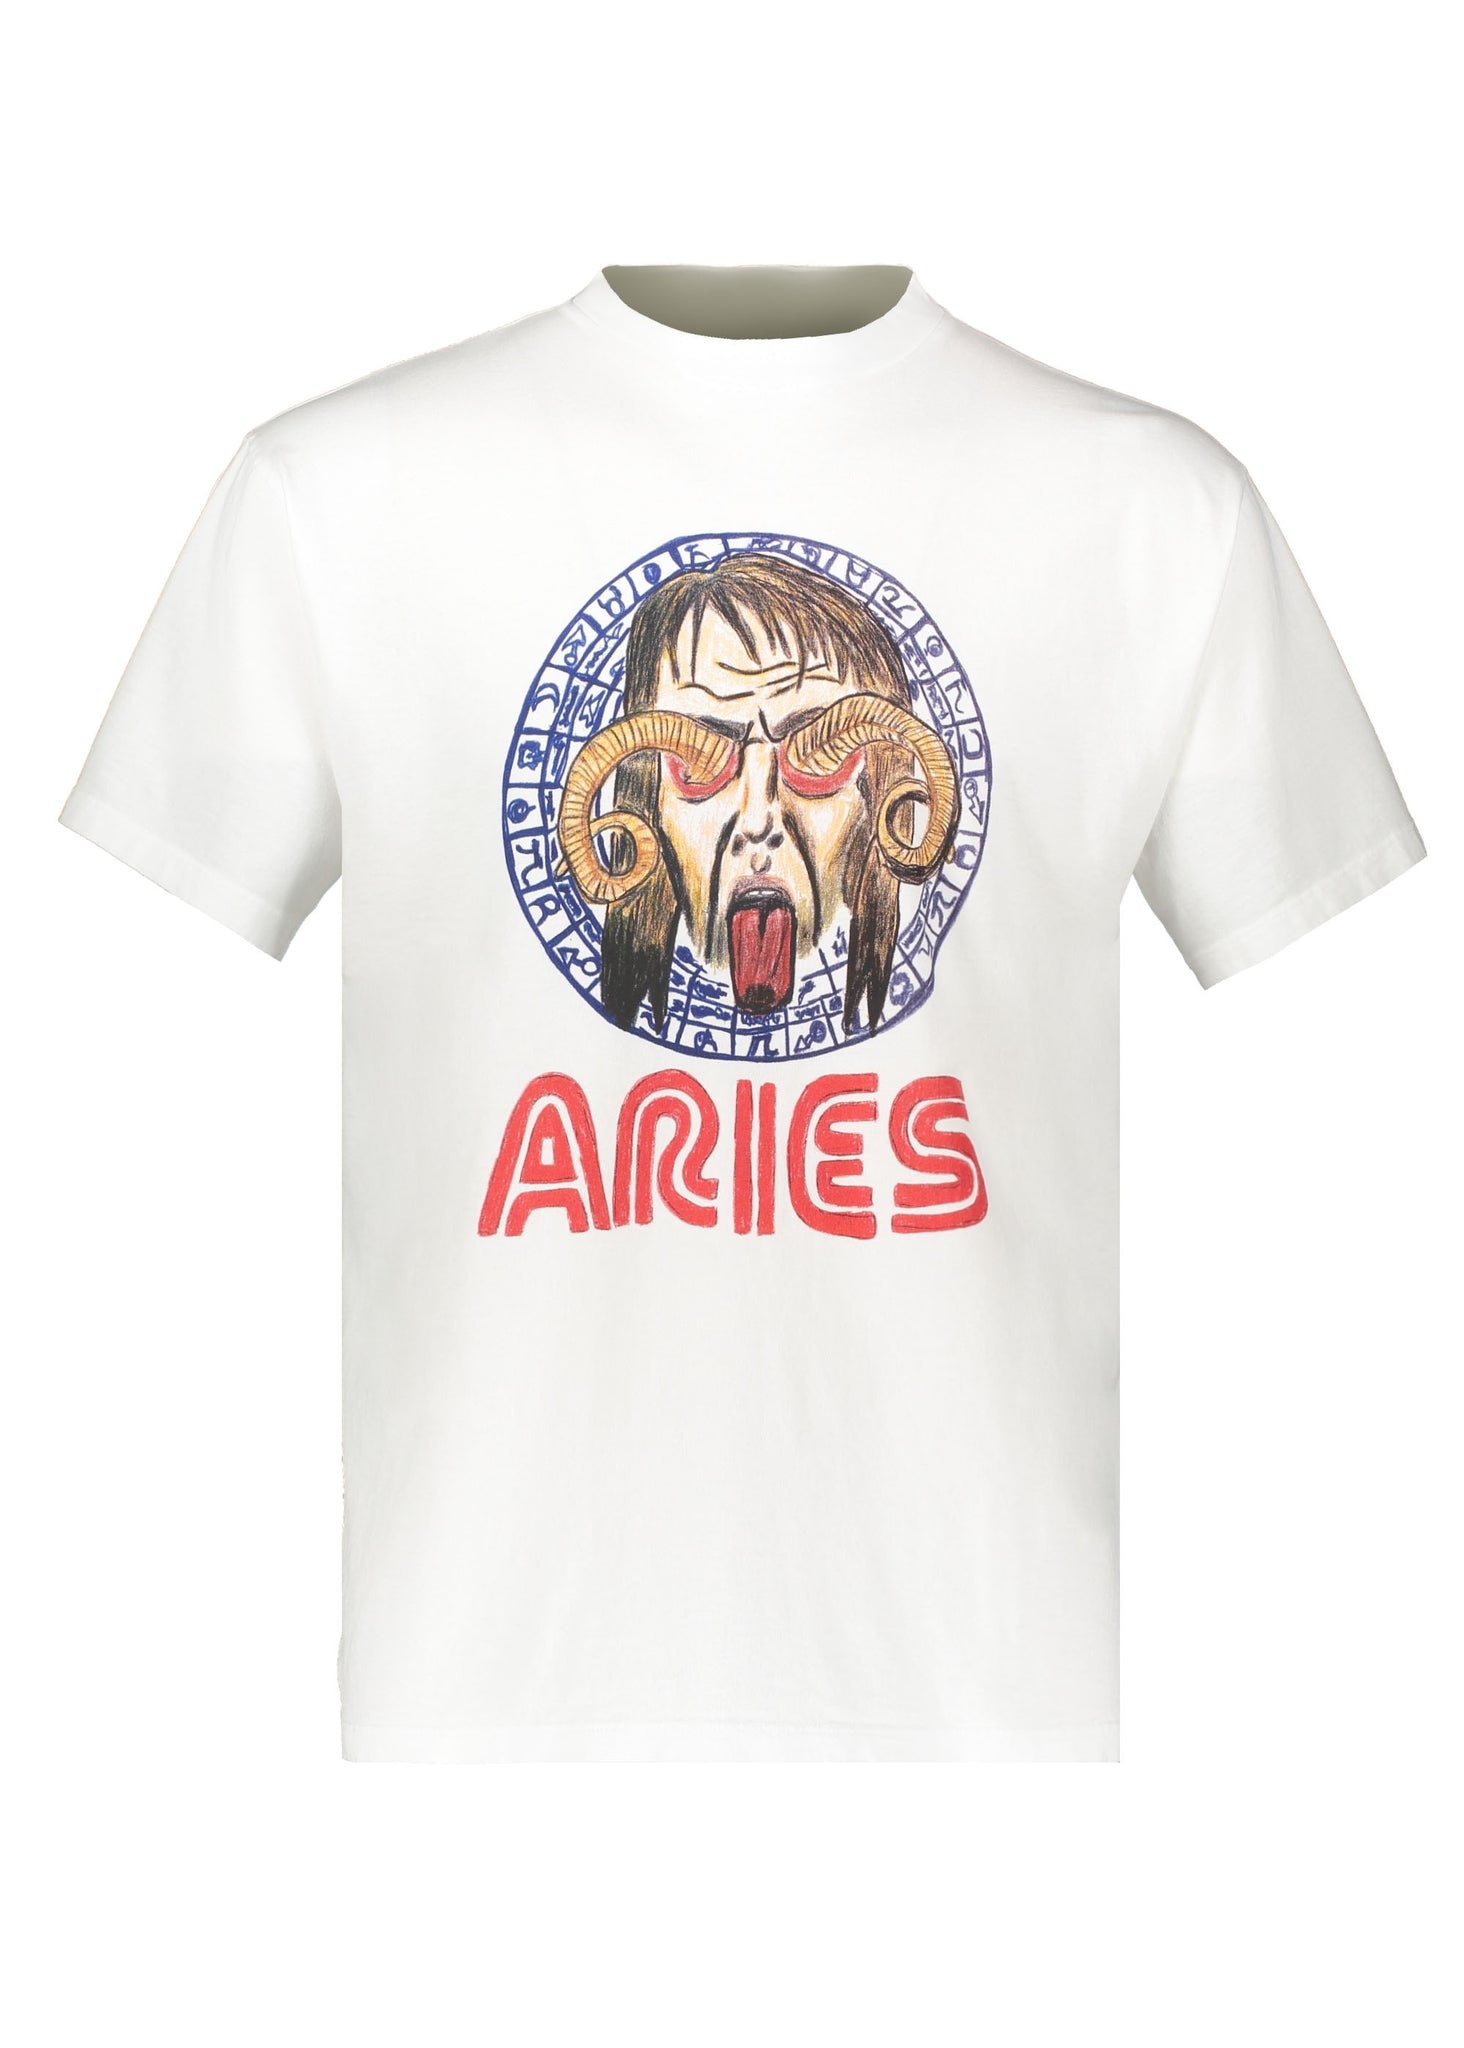 Aries Astrology for Aliens Tee - White